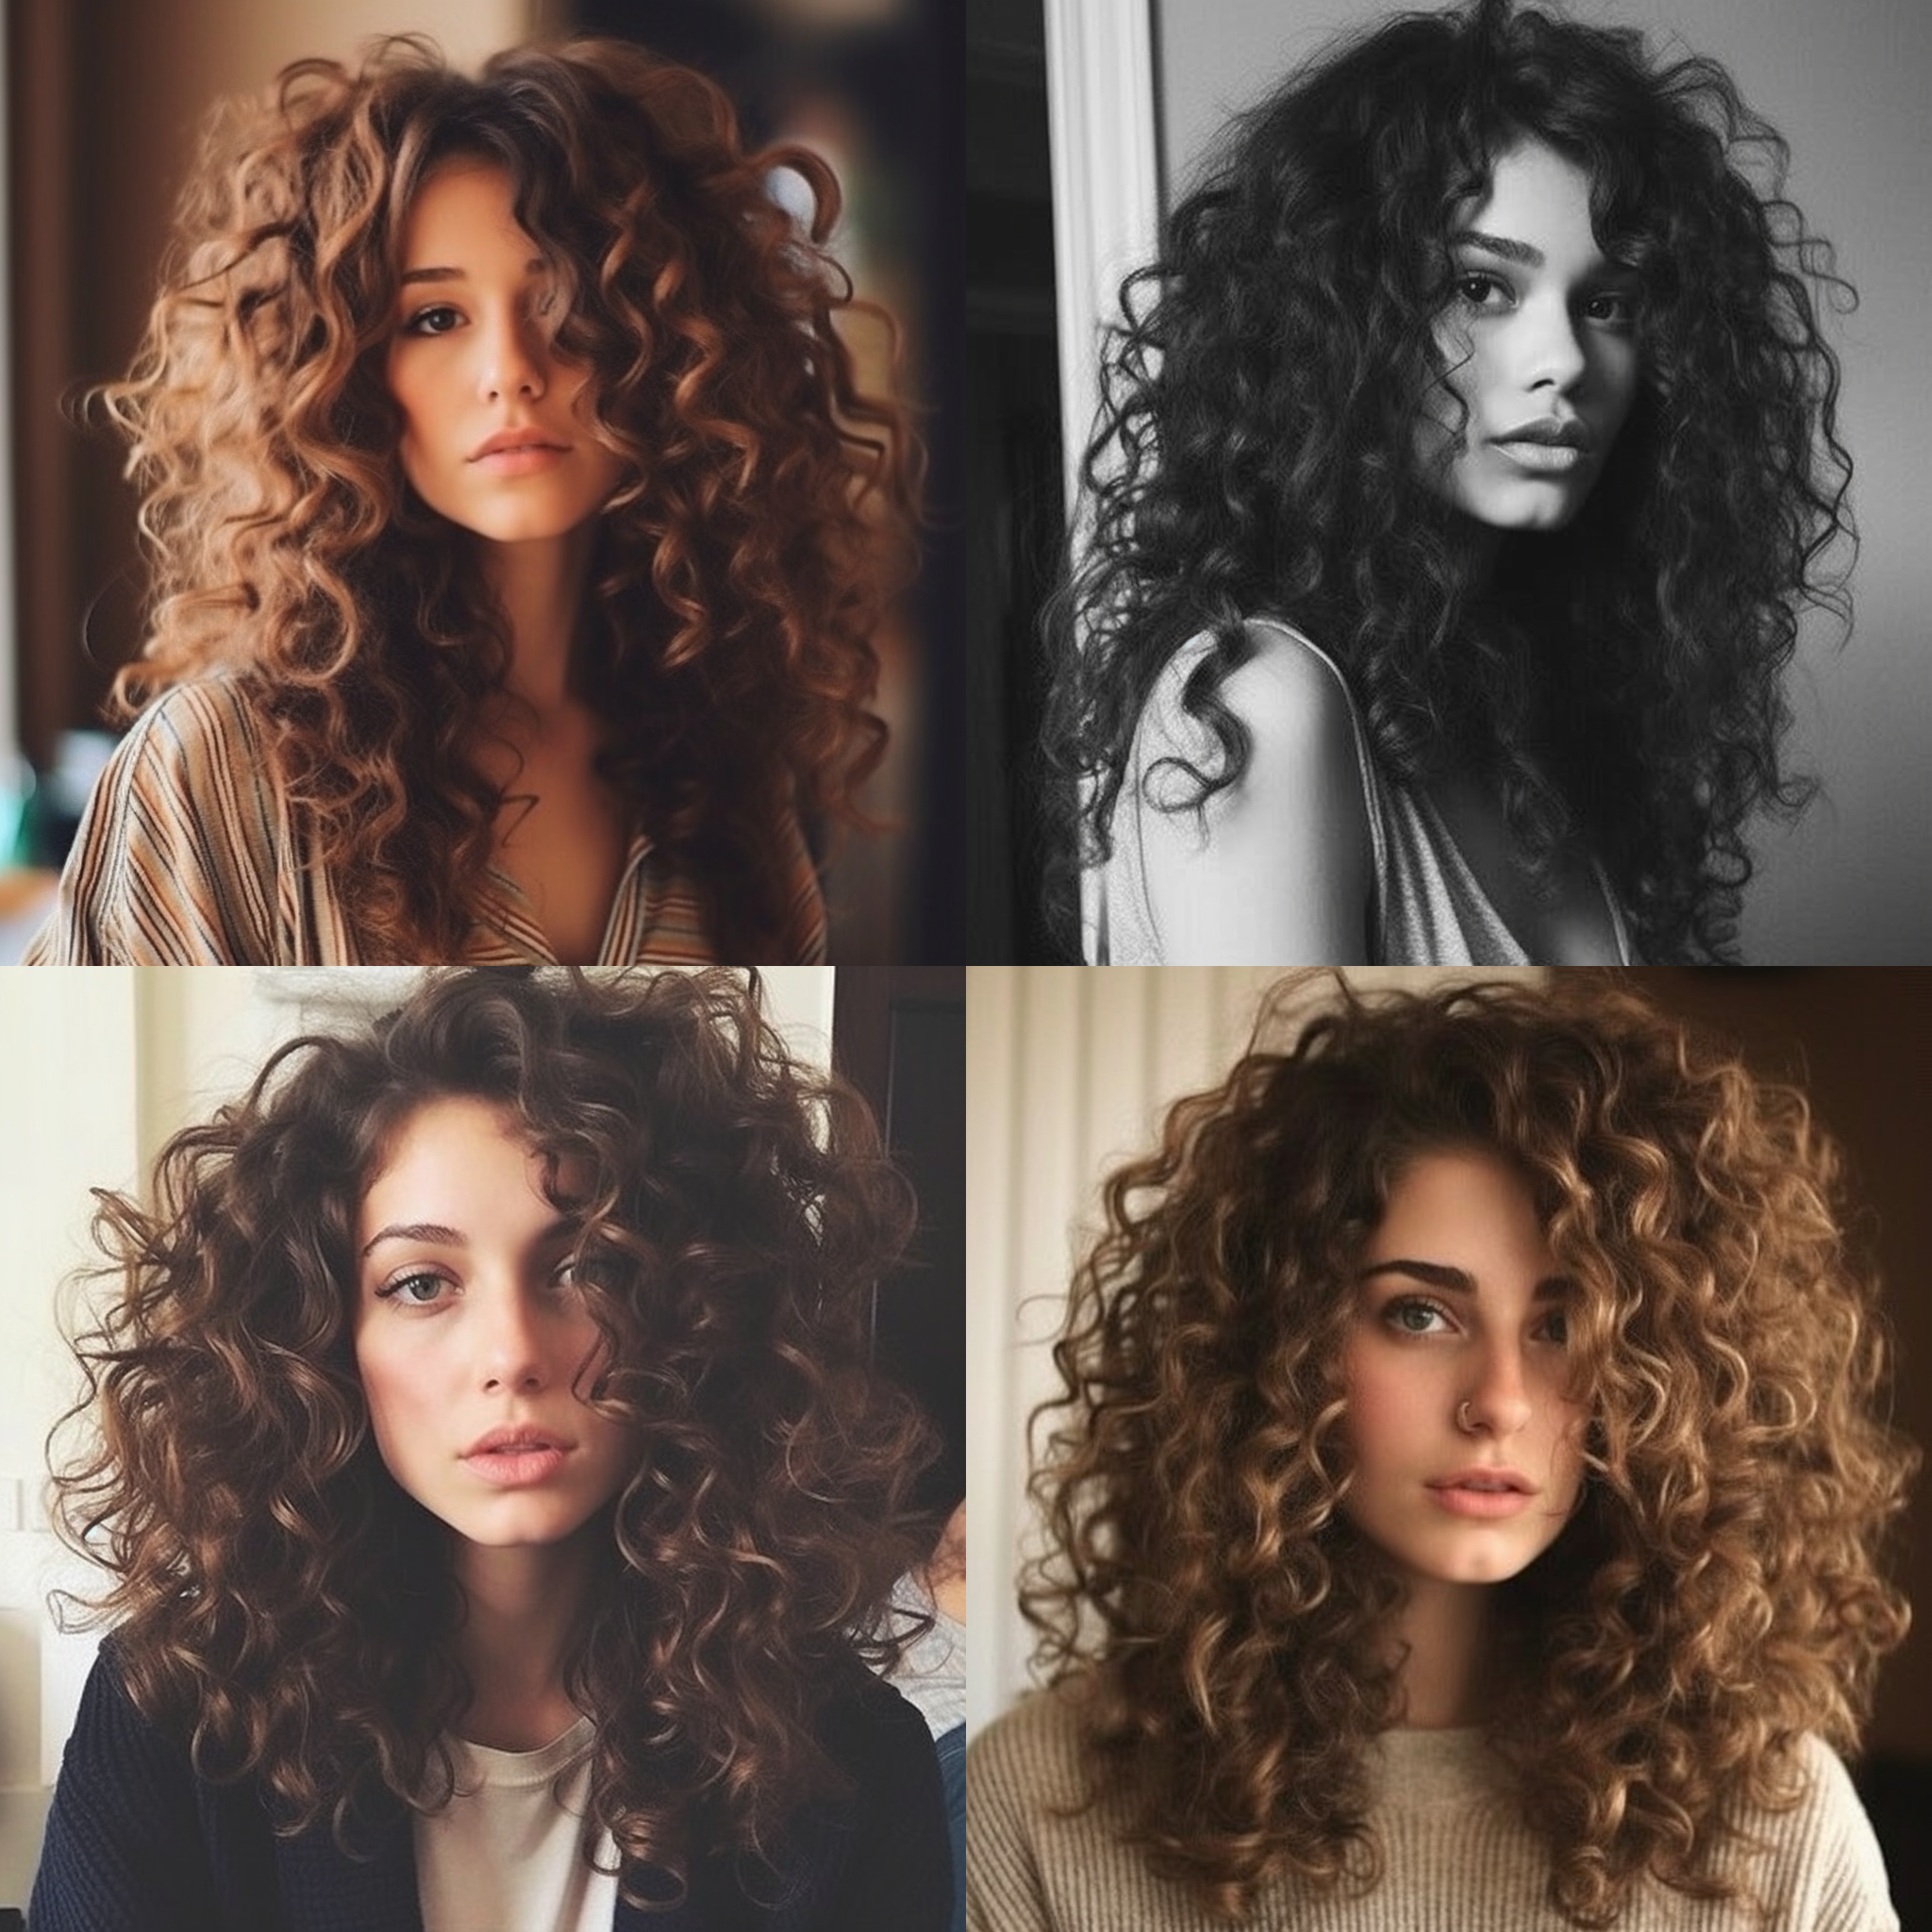 meowithai Curly Hair 514ade39 587d 48d8 bb14 af9223c6b880